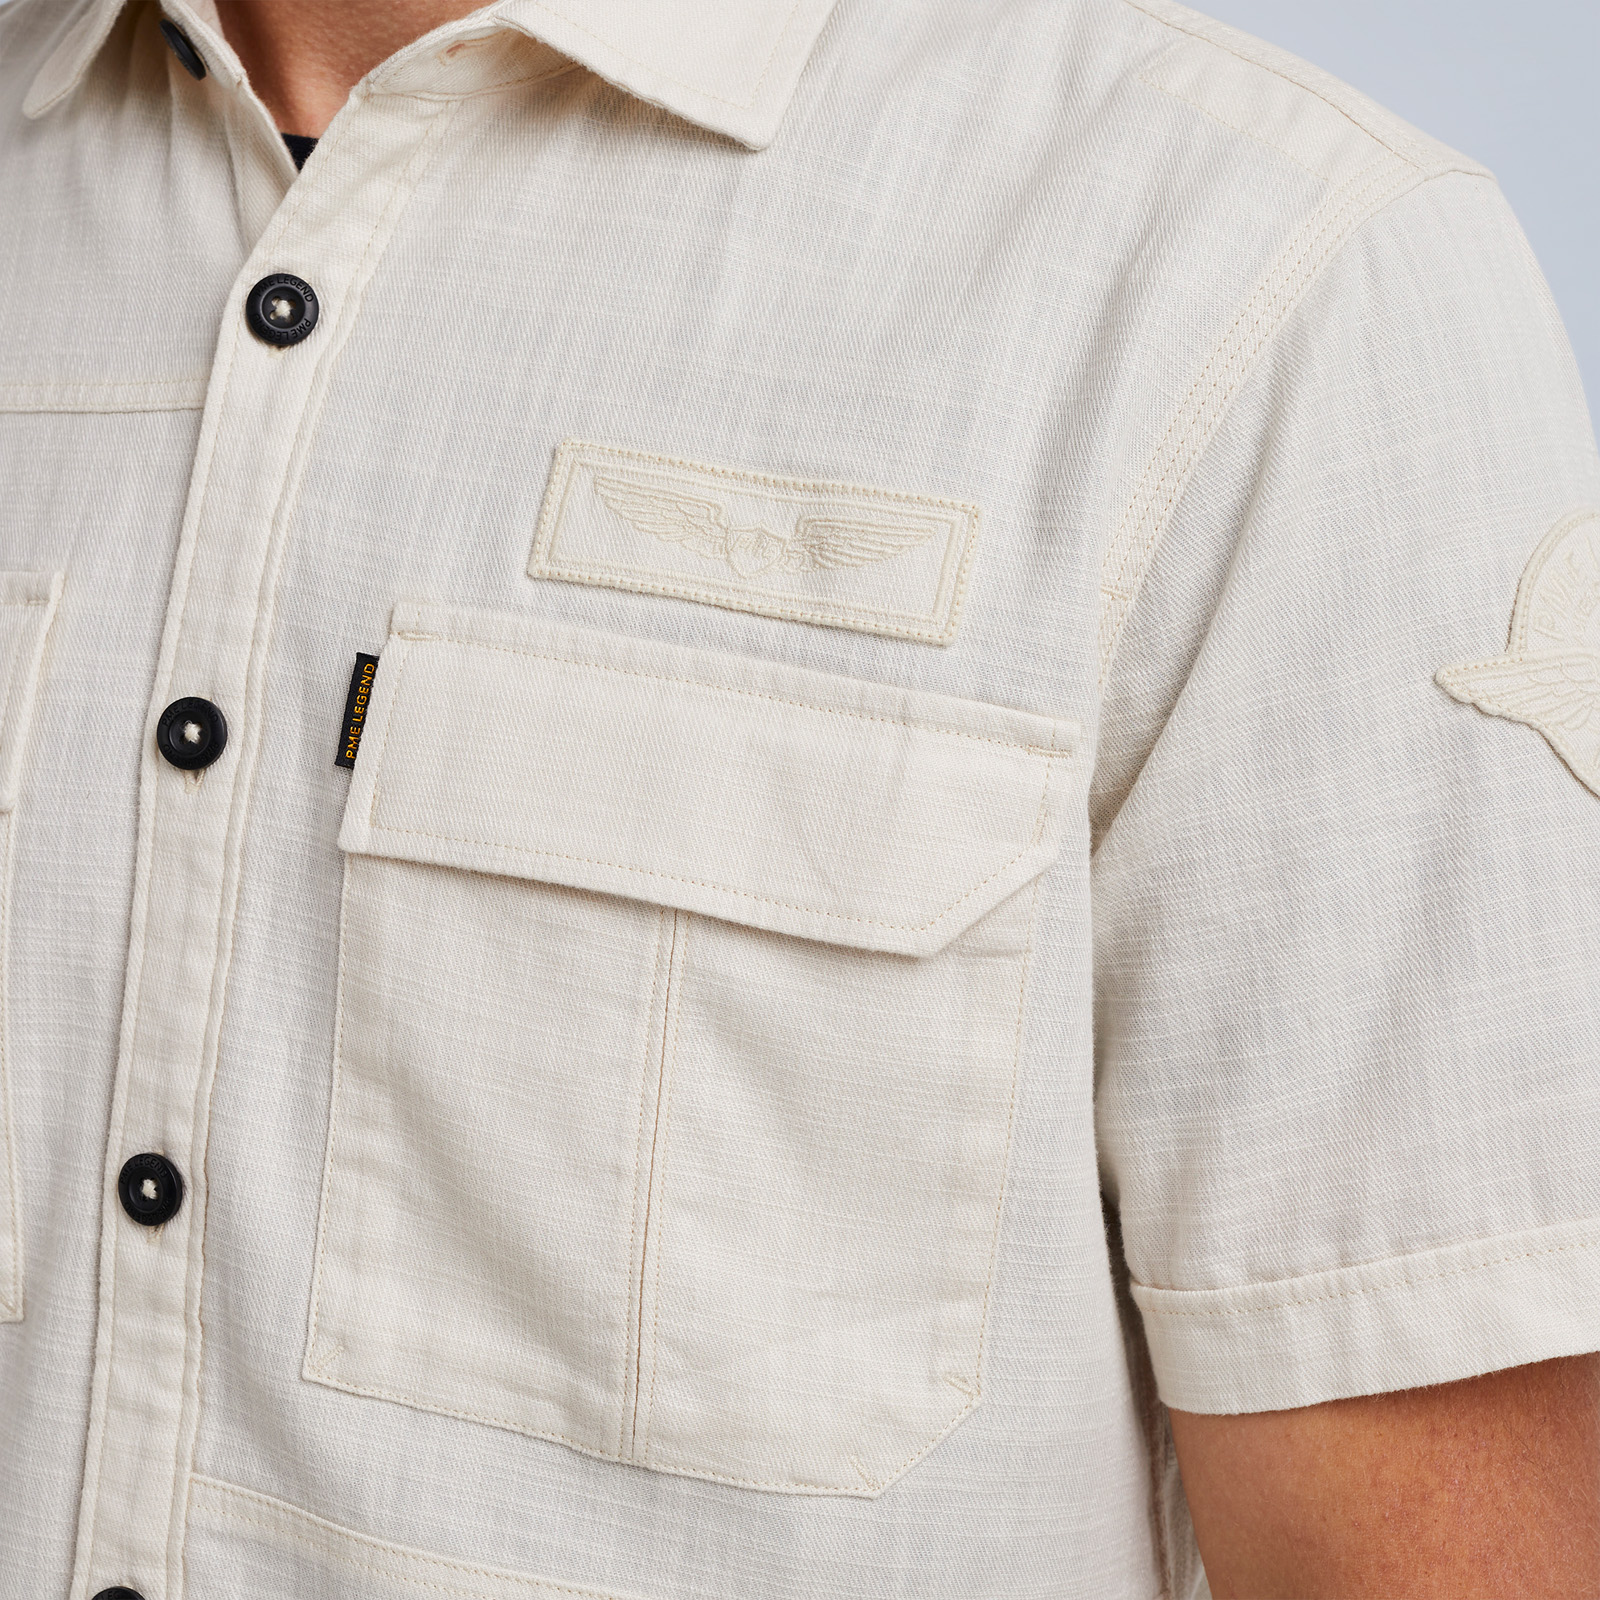 PME LEGEND | Short | Cotton returns and Shirt Sleeve shipping Free